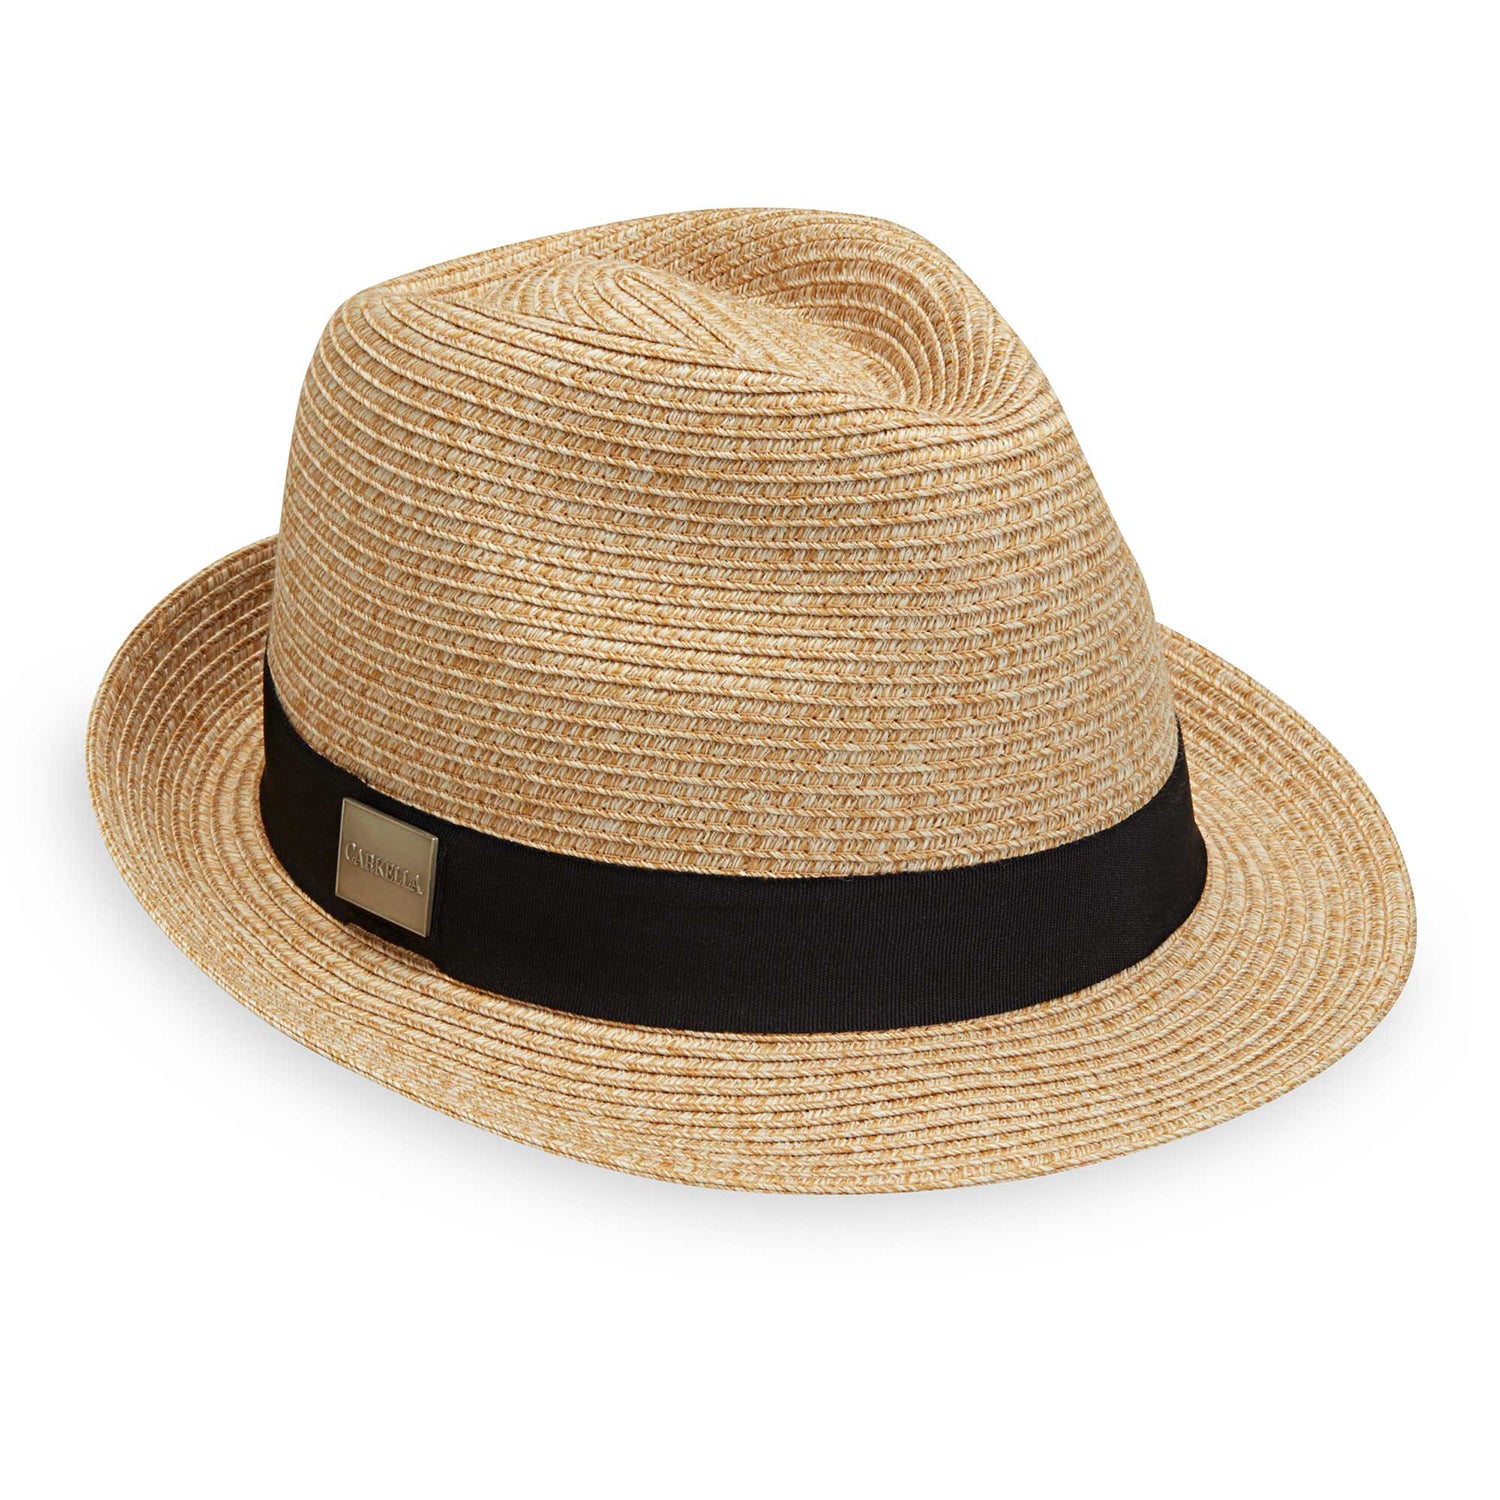 Featuring Carkella Trilby style Del Mar sun hat for men and women made with packable material